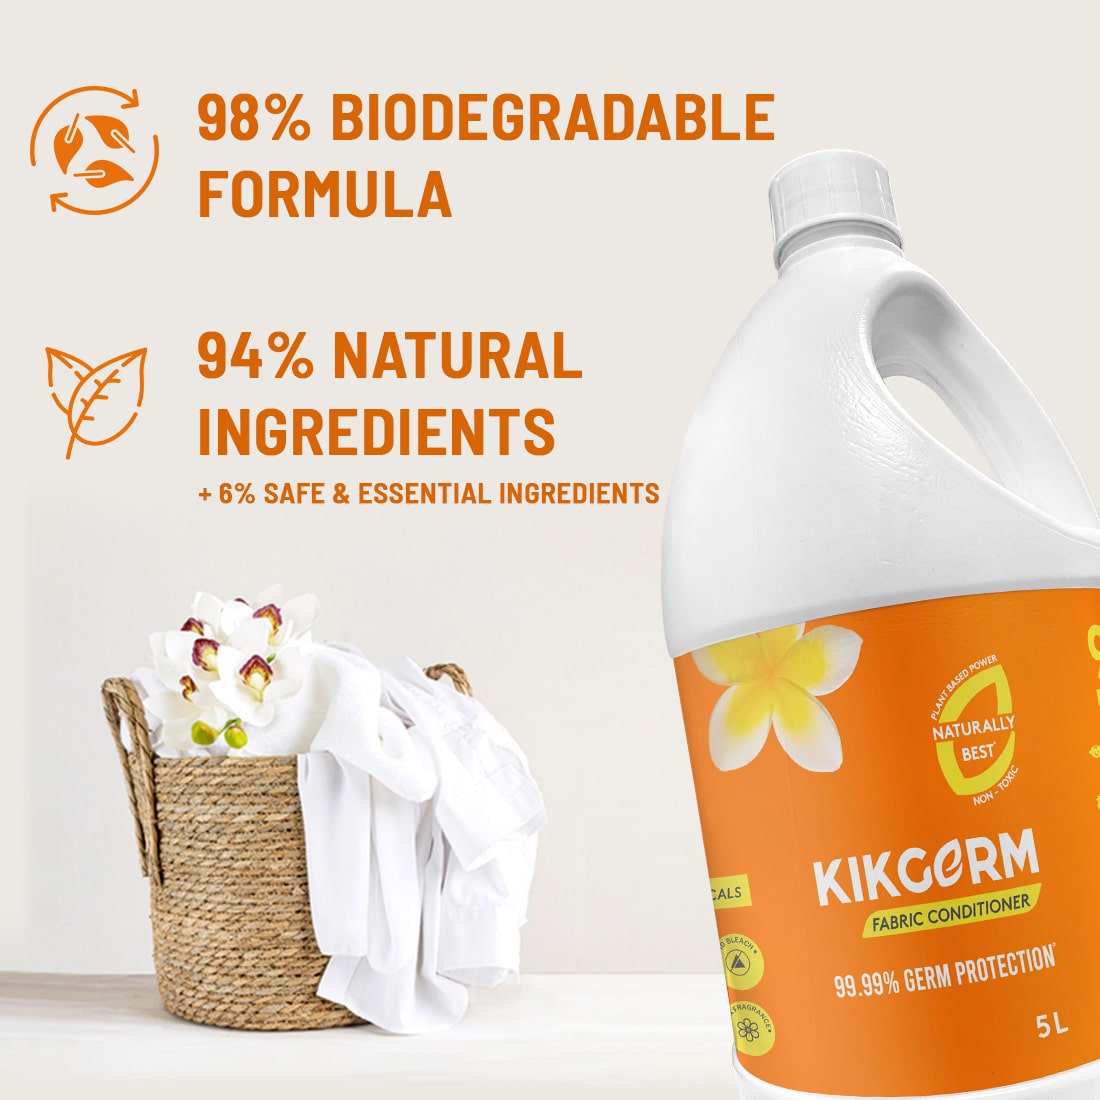 KIKGERM Naturally Best Fabric Conditioner | No Harmful Chemicals & 99.99% Germ Protection | New & Shiny Clothes | 5 Litr